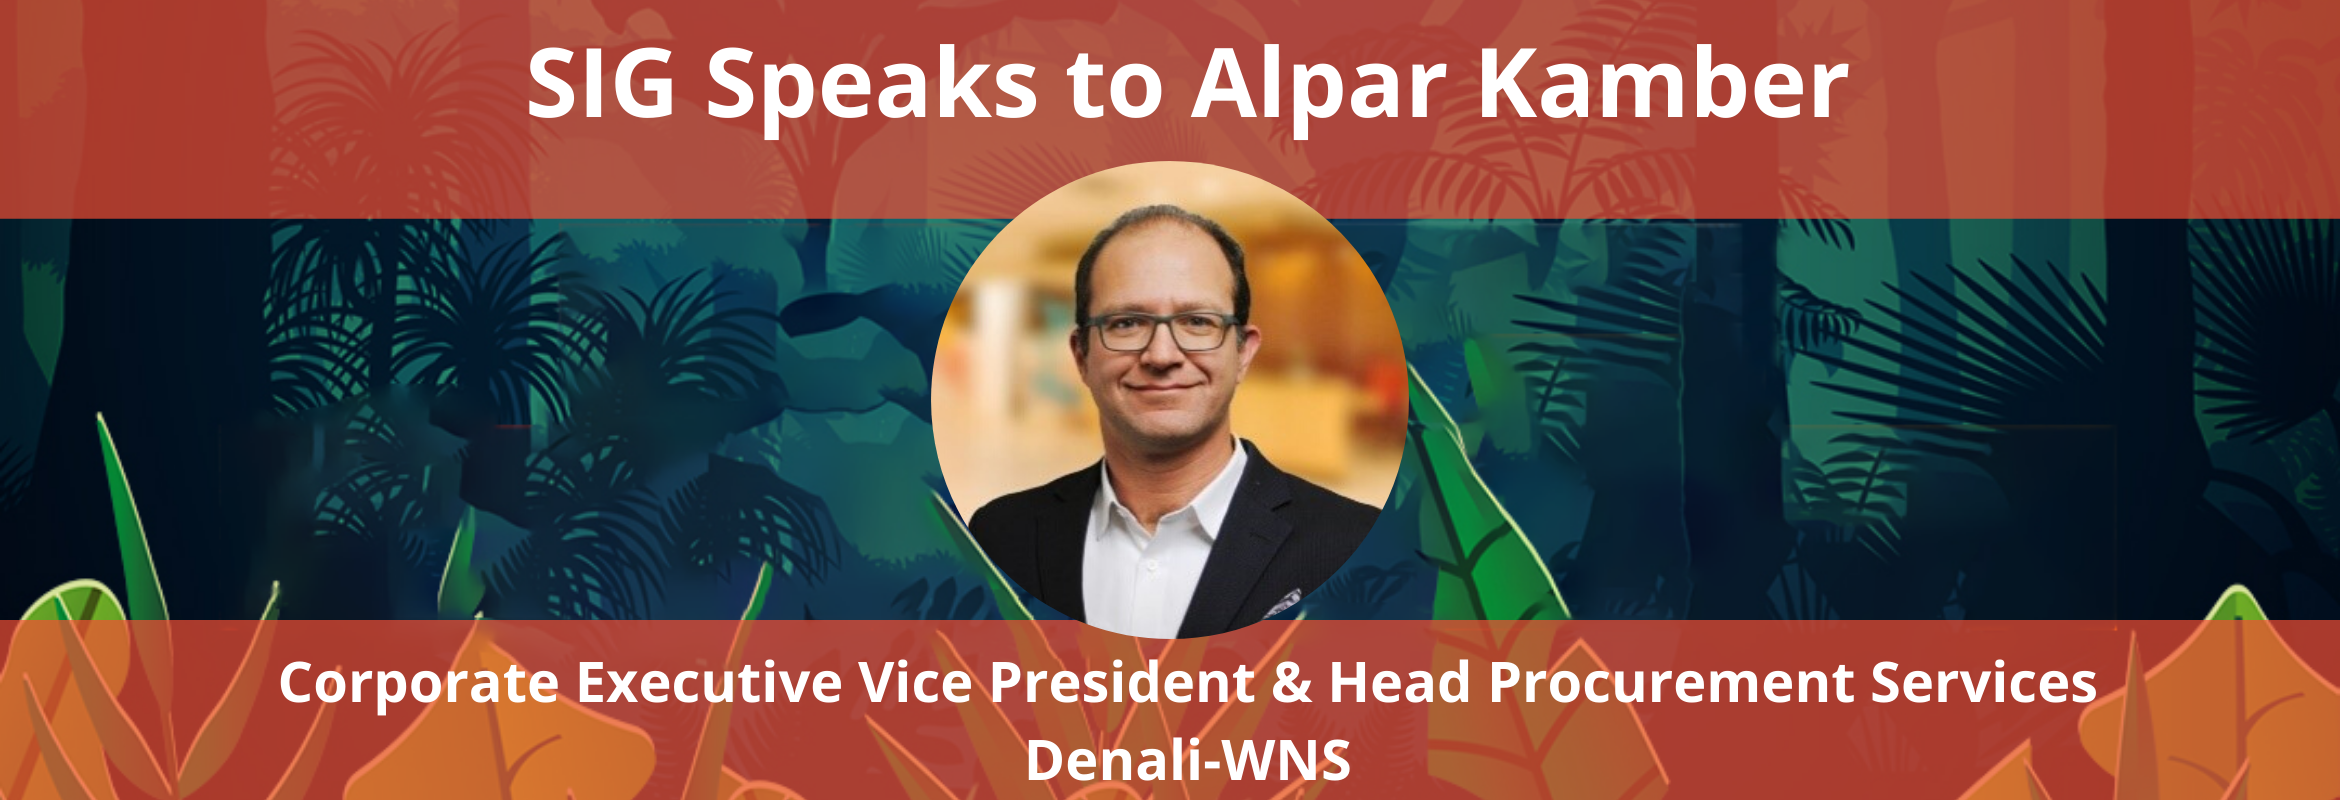 Alpar Kamber is the Head of Procurement Services at WNS